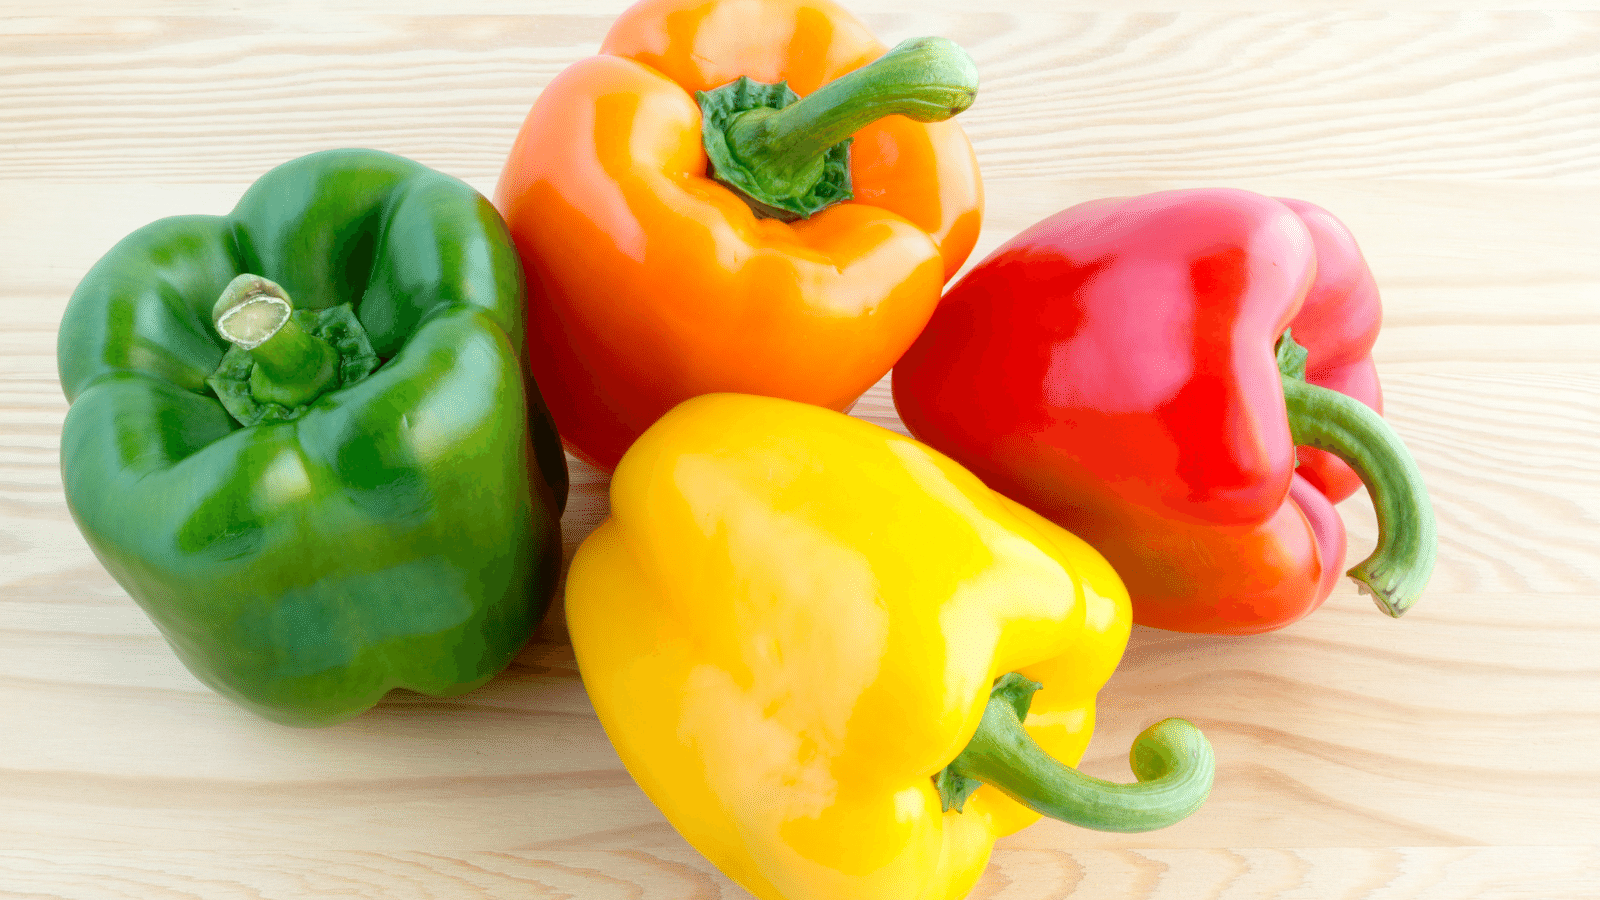 Variety of bell peppers.